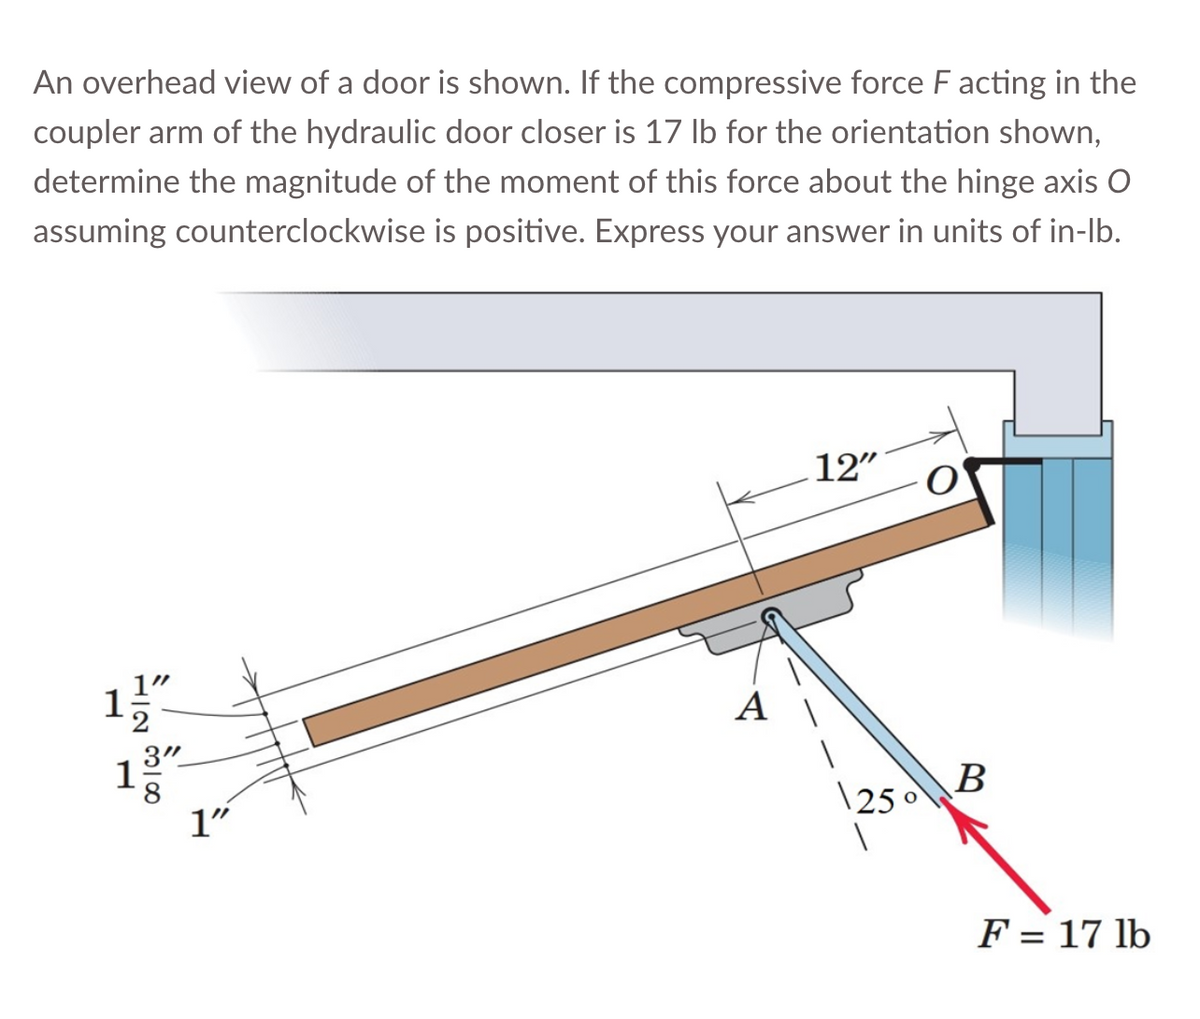 An overhead view of a door is shown. If the compressive force F acting in the
coupler arm of the hydraulic door closer is 17 lb for the orientation shown,
determine the magnitude of the moment of this force about the hinge axis O
assuming counterclockwise is positive. Express your answer in units of in-lb.
1⁄/″
3"
8
1
1"
12"
1250
B
F = 17 lb